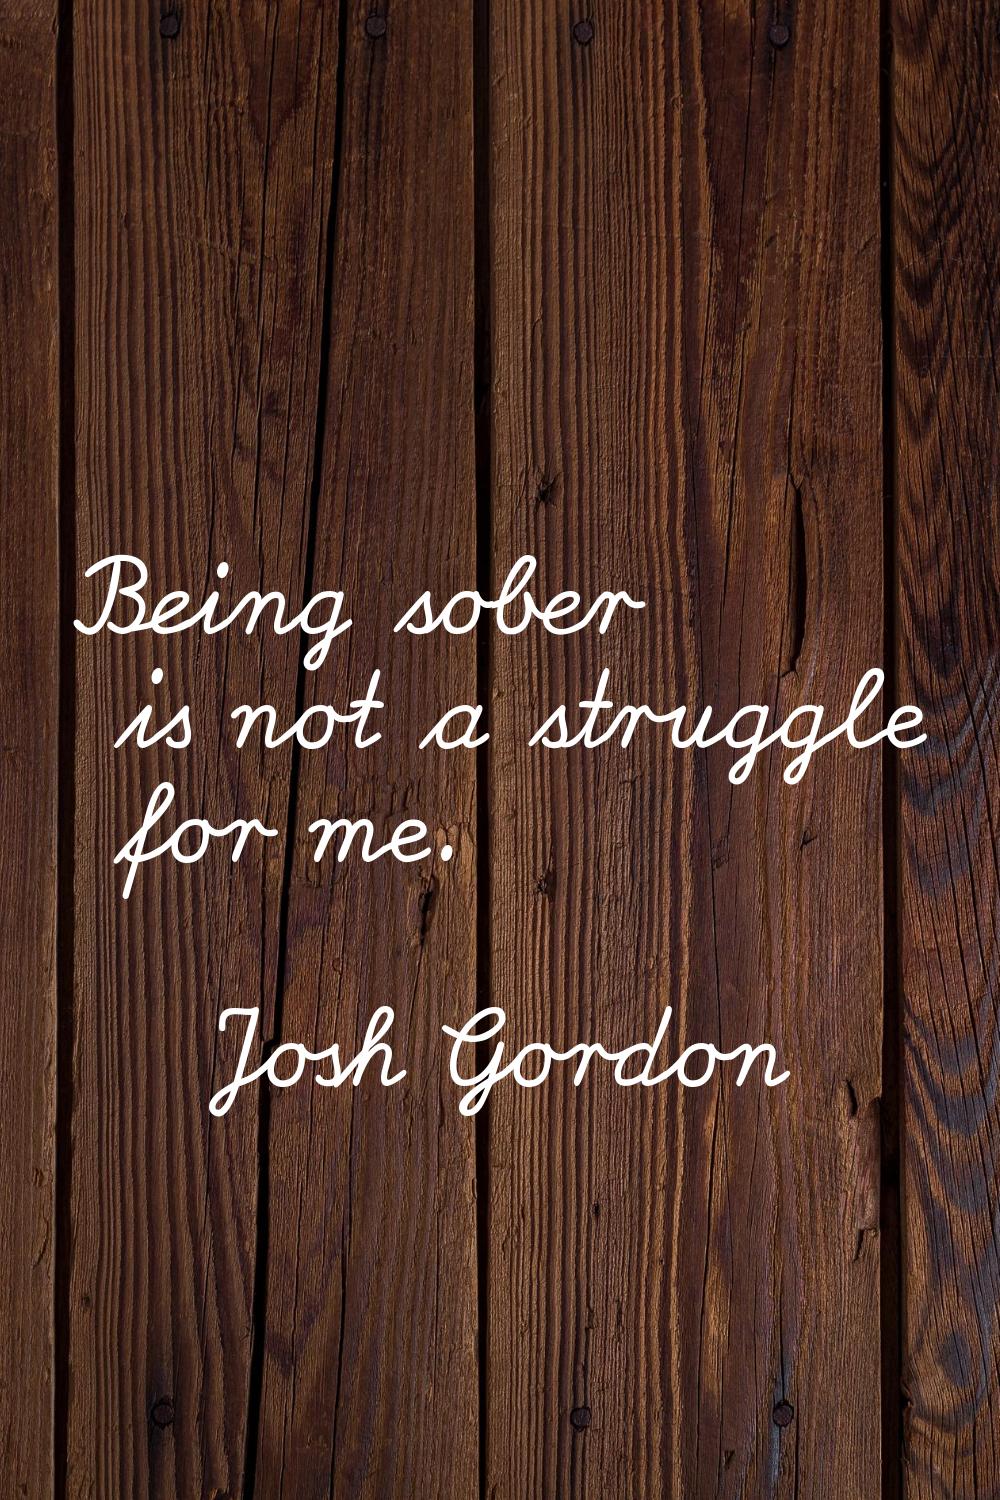 Being sober is not a struggle for me.